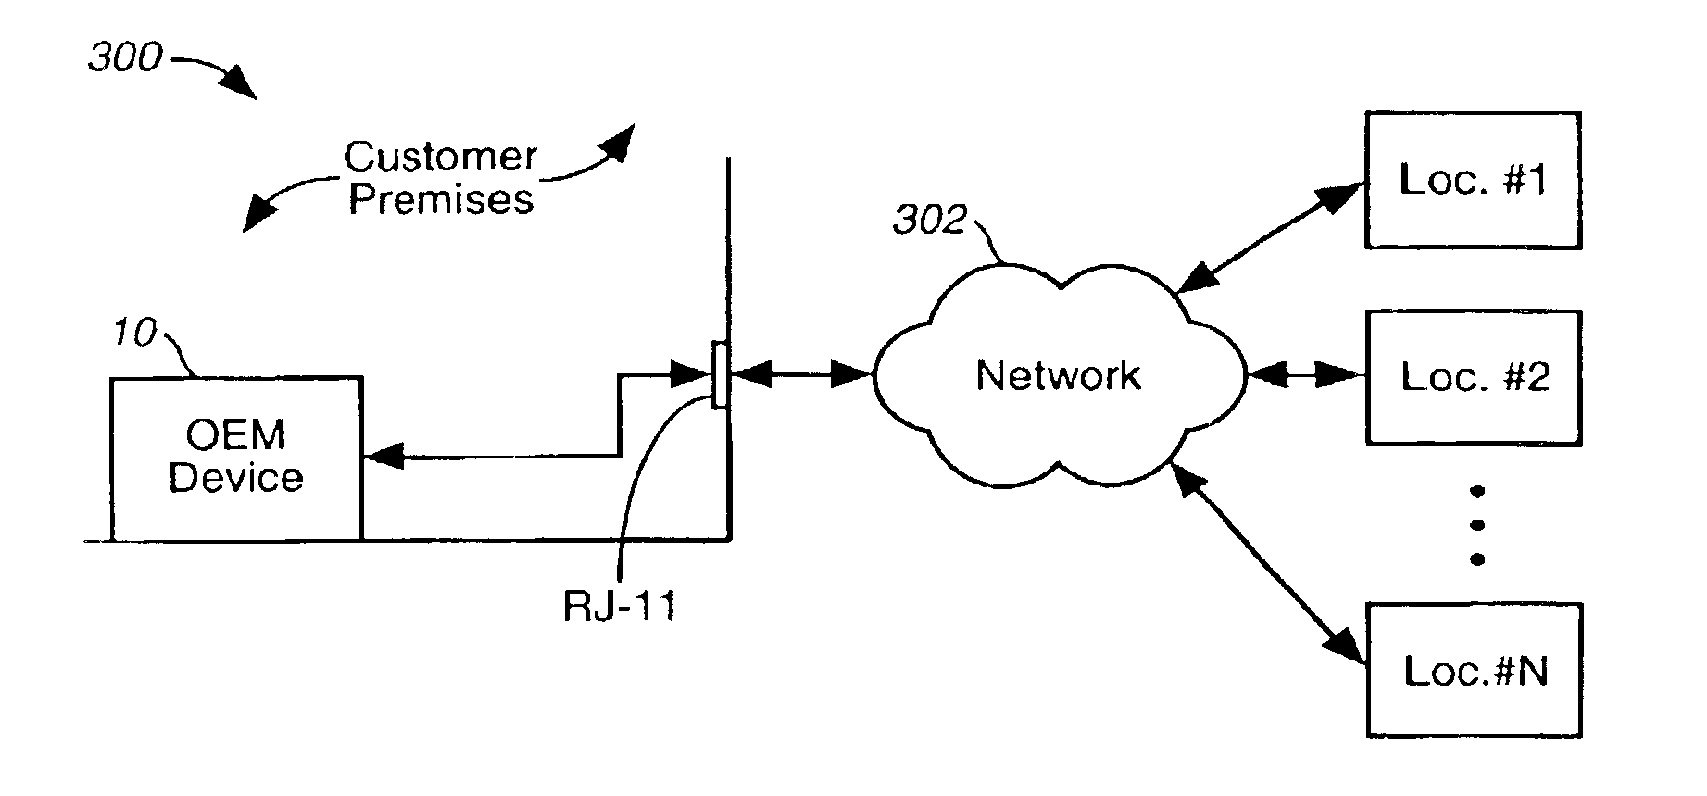 Method and apparatus for estimating quality in a telephonic voice connection